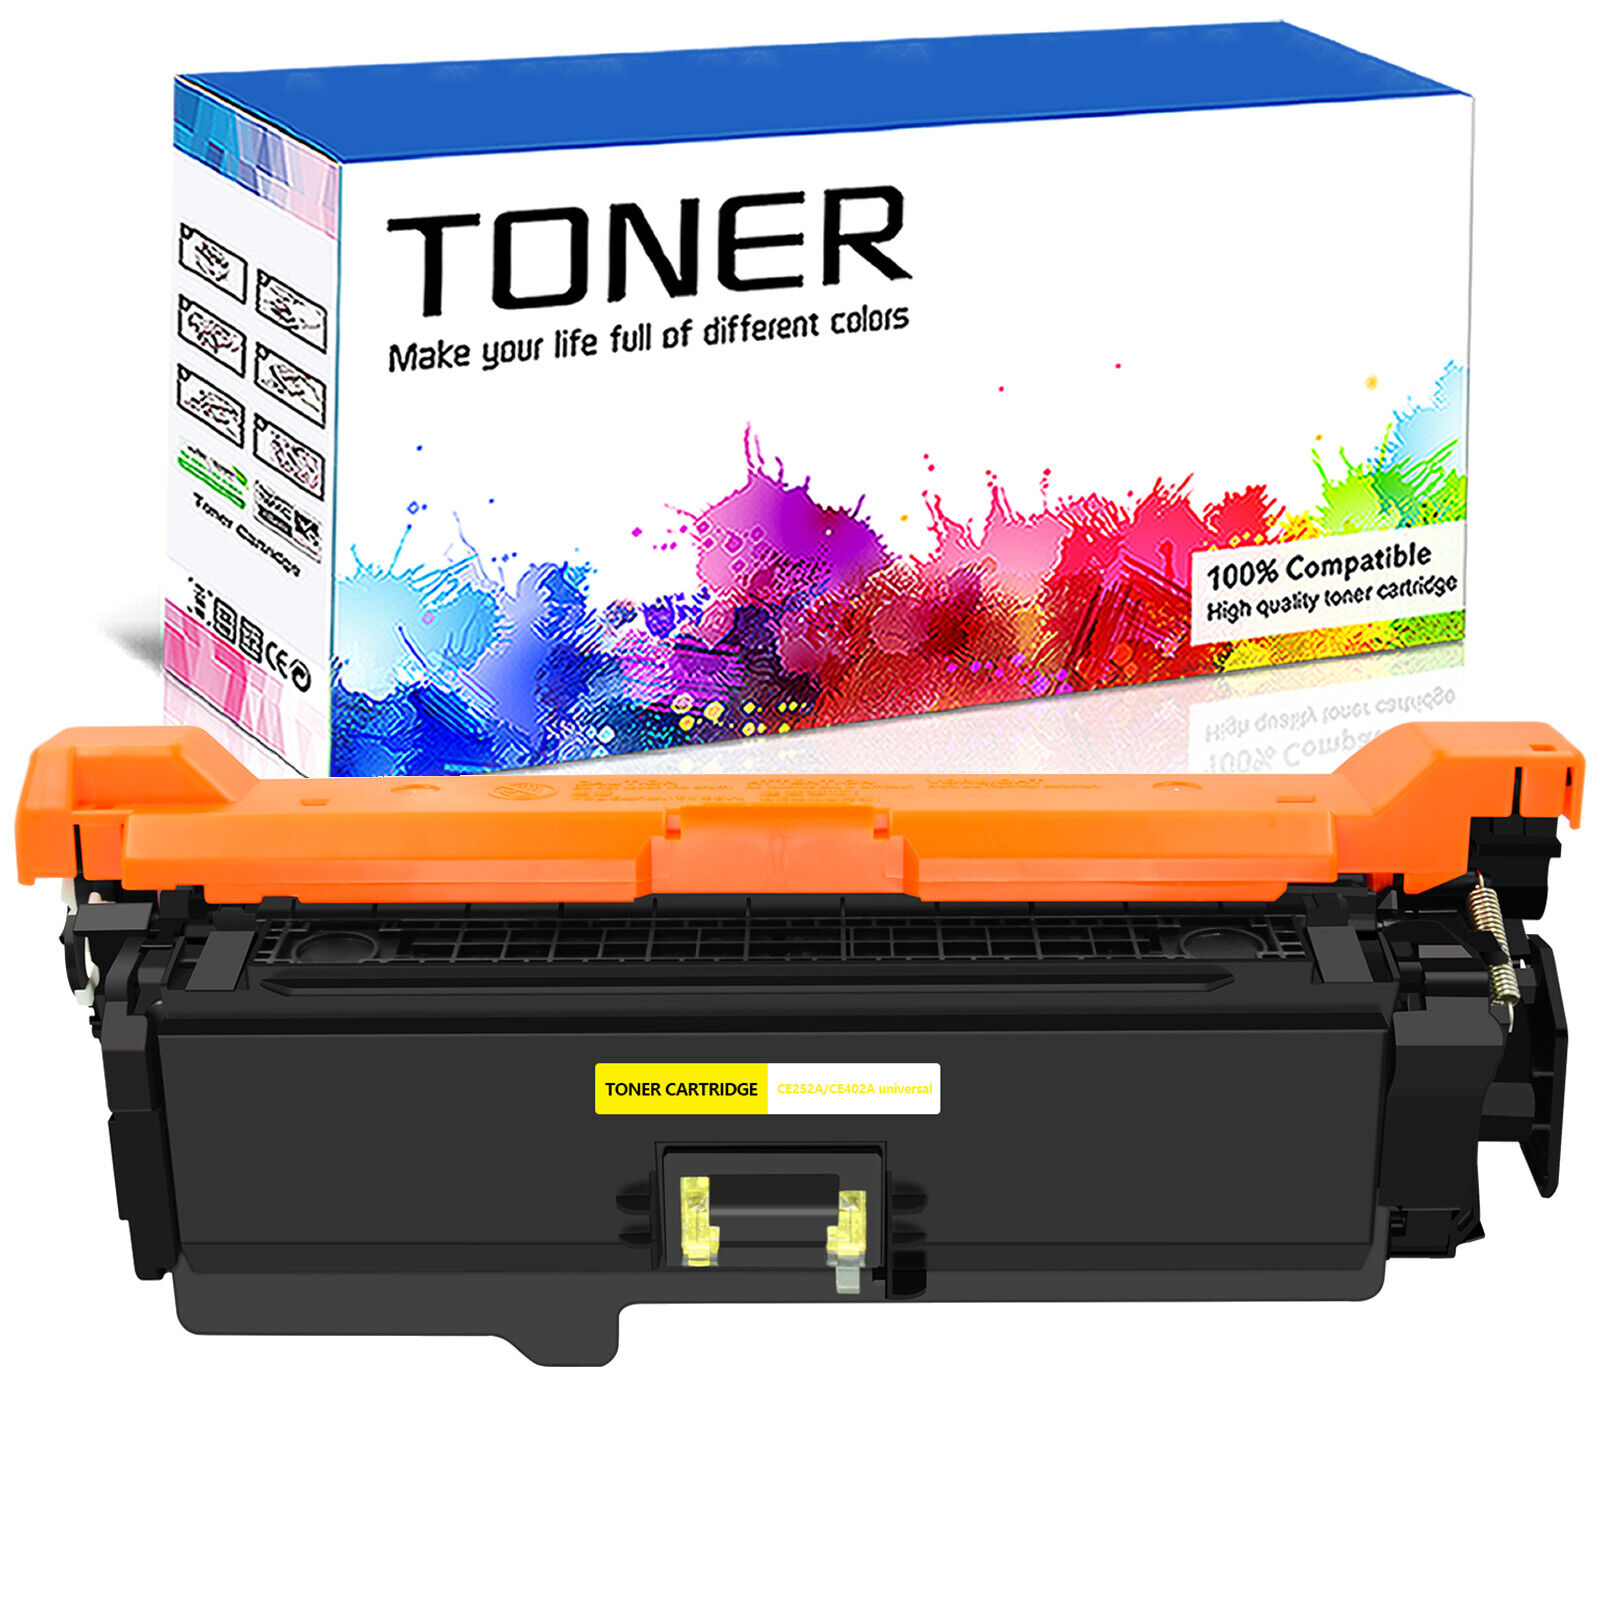 1 PK/Pack Yellow CE252A 504A Toner for HP LaserJet CP3525dn CP3525n 3525x CP3530